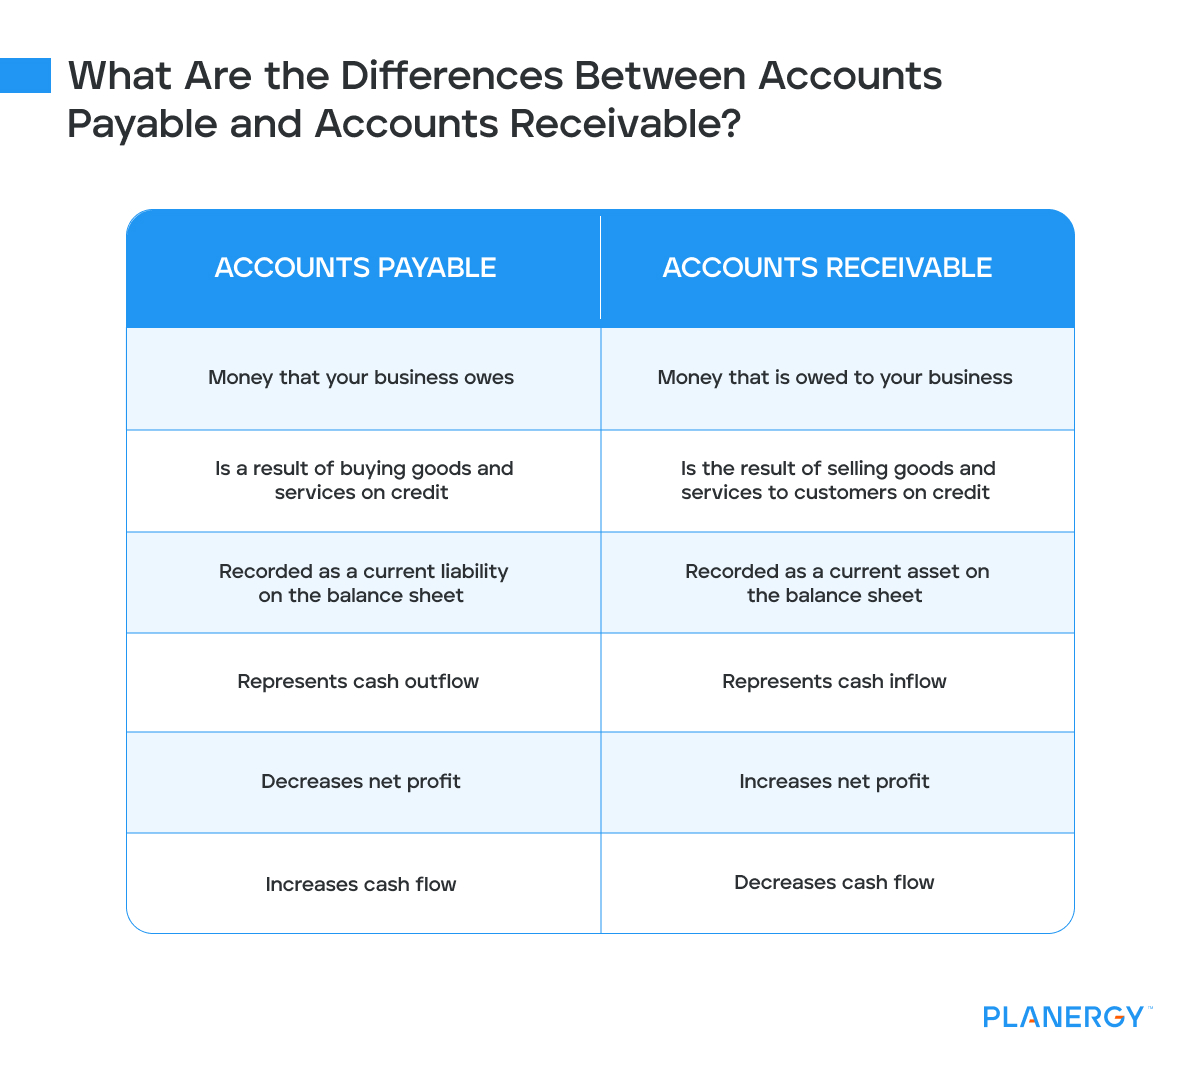 Differences between accounts payable and accounts receivable